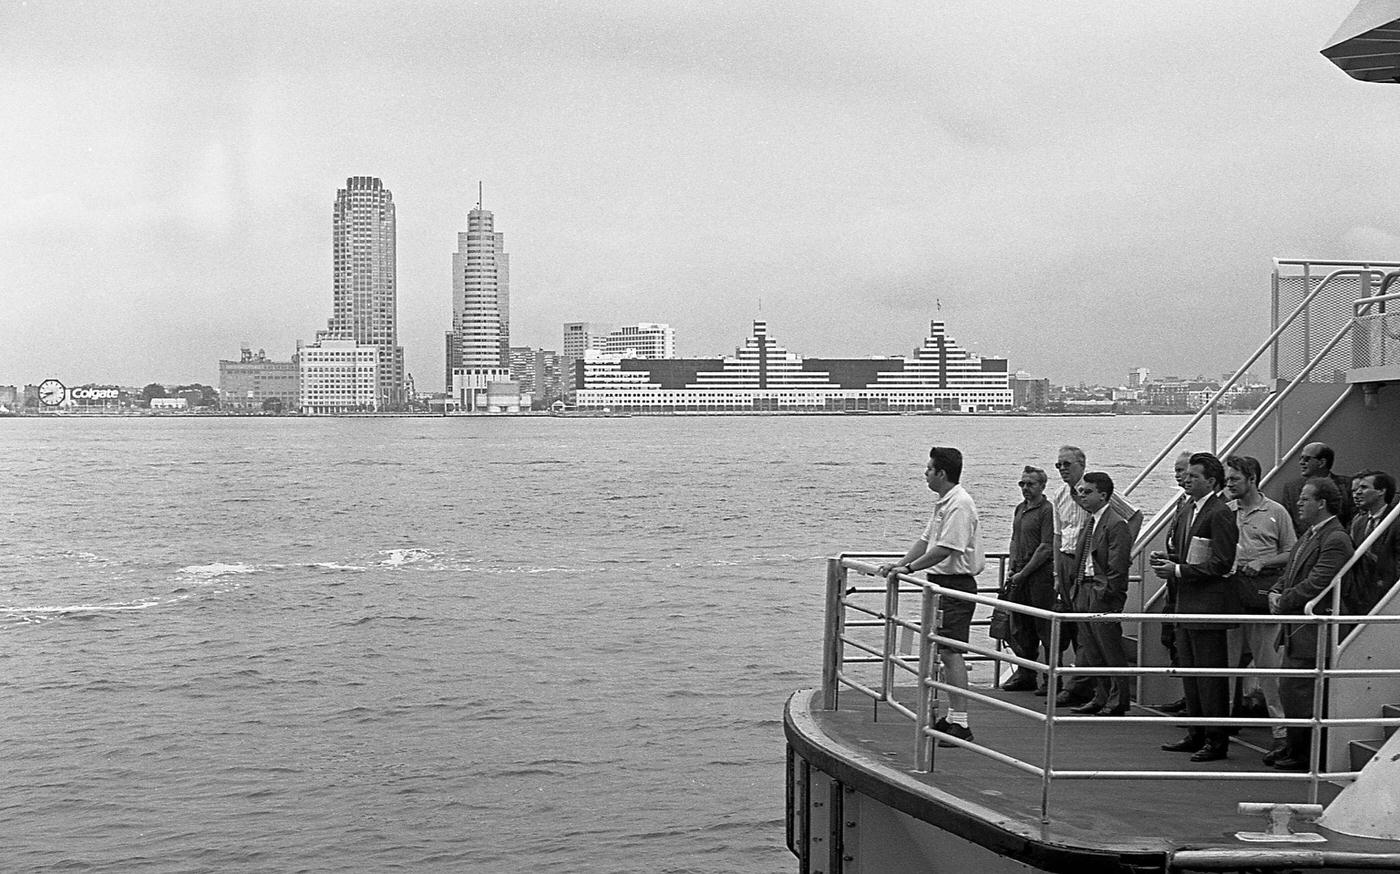 Commuters Prepare To Exit The Robert Fulton Ferry At Battery Park City With Jersey City Skyline Visible, Manhattan, 1997